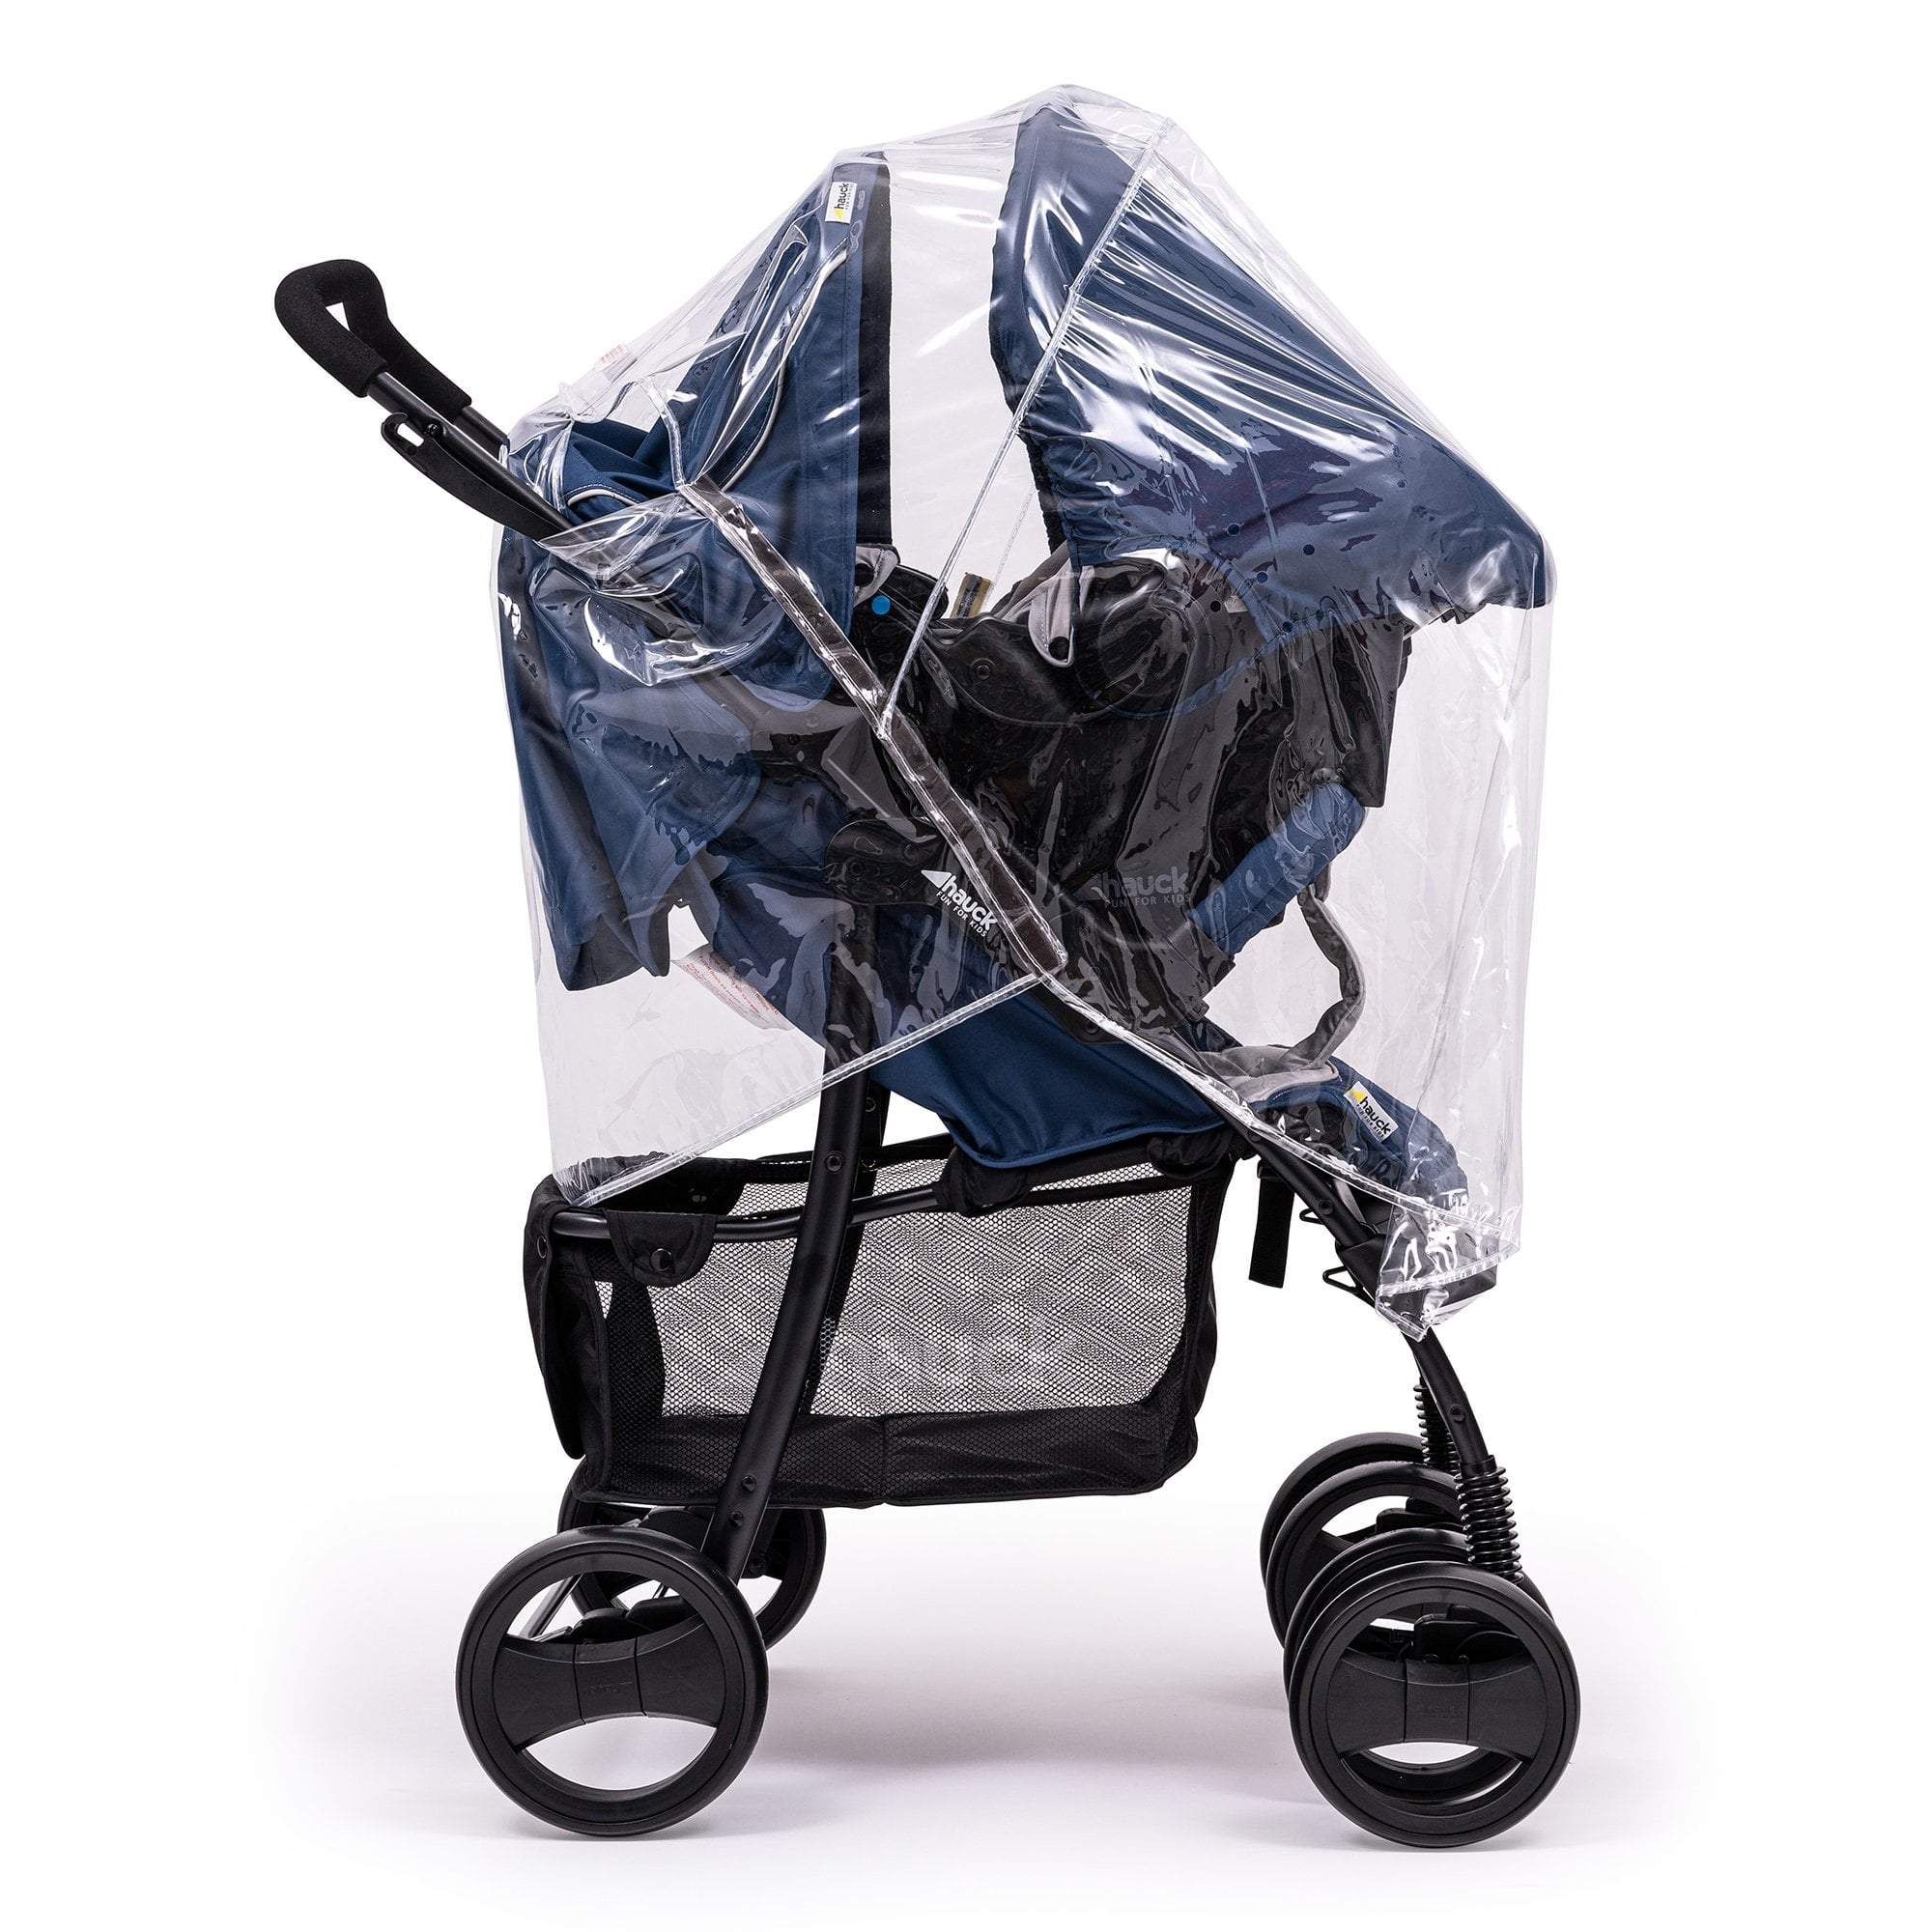 Travel System Raincover Compatible with Baby Elegance - Fits All Models -  | For Your Little One